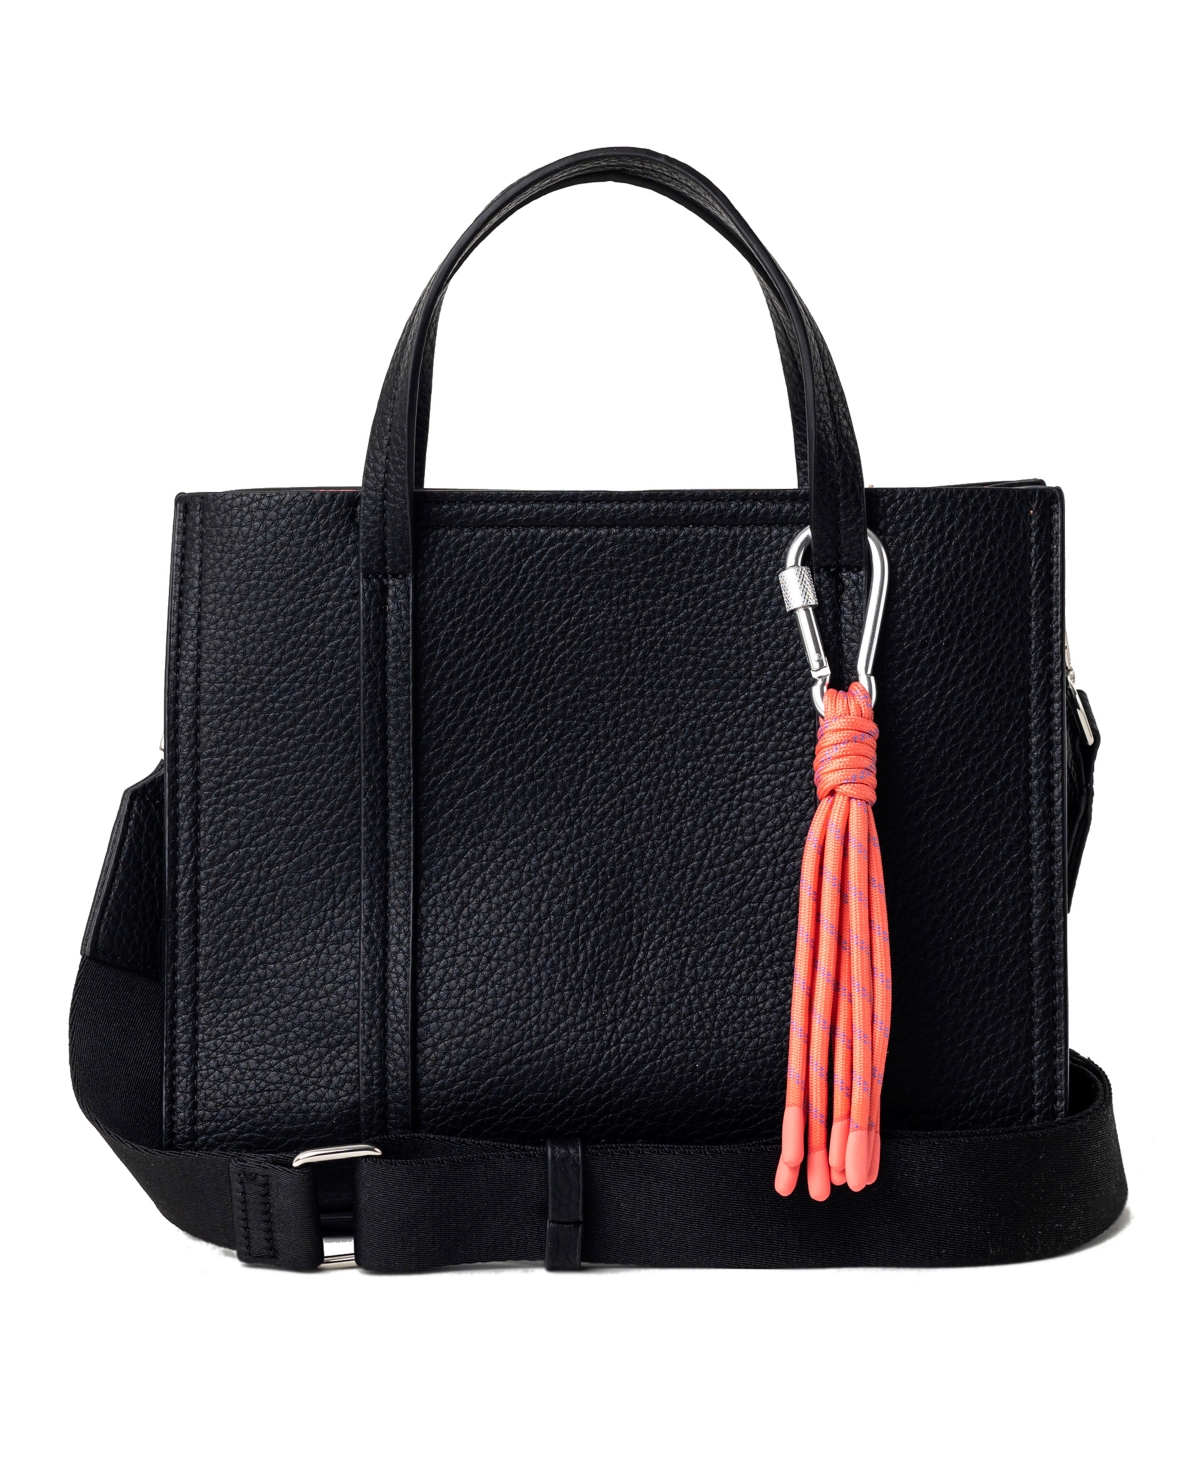 Urban Originals Fearless Faux Leather Tote Bag In Black